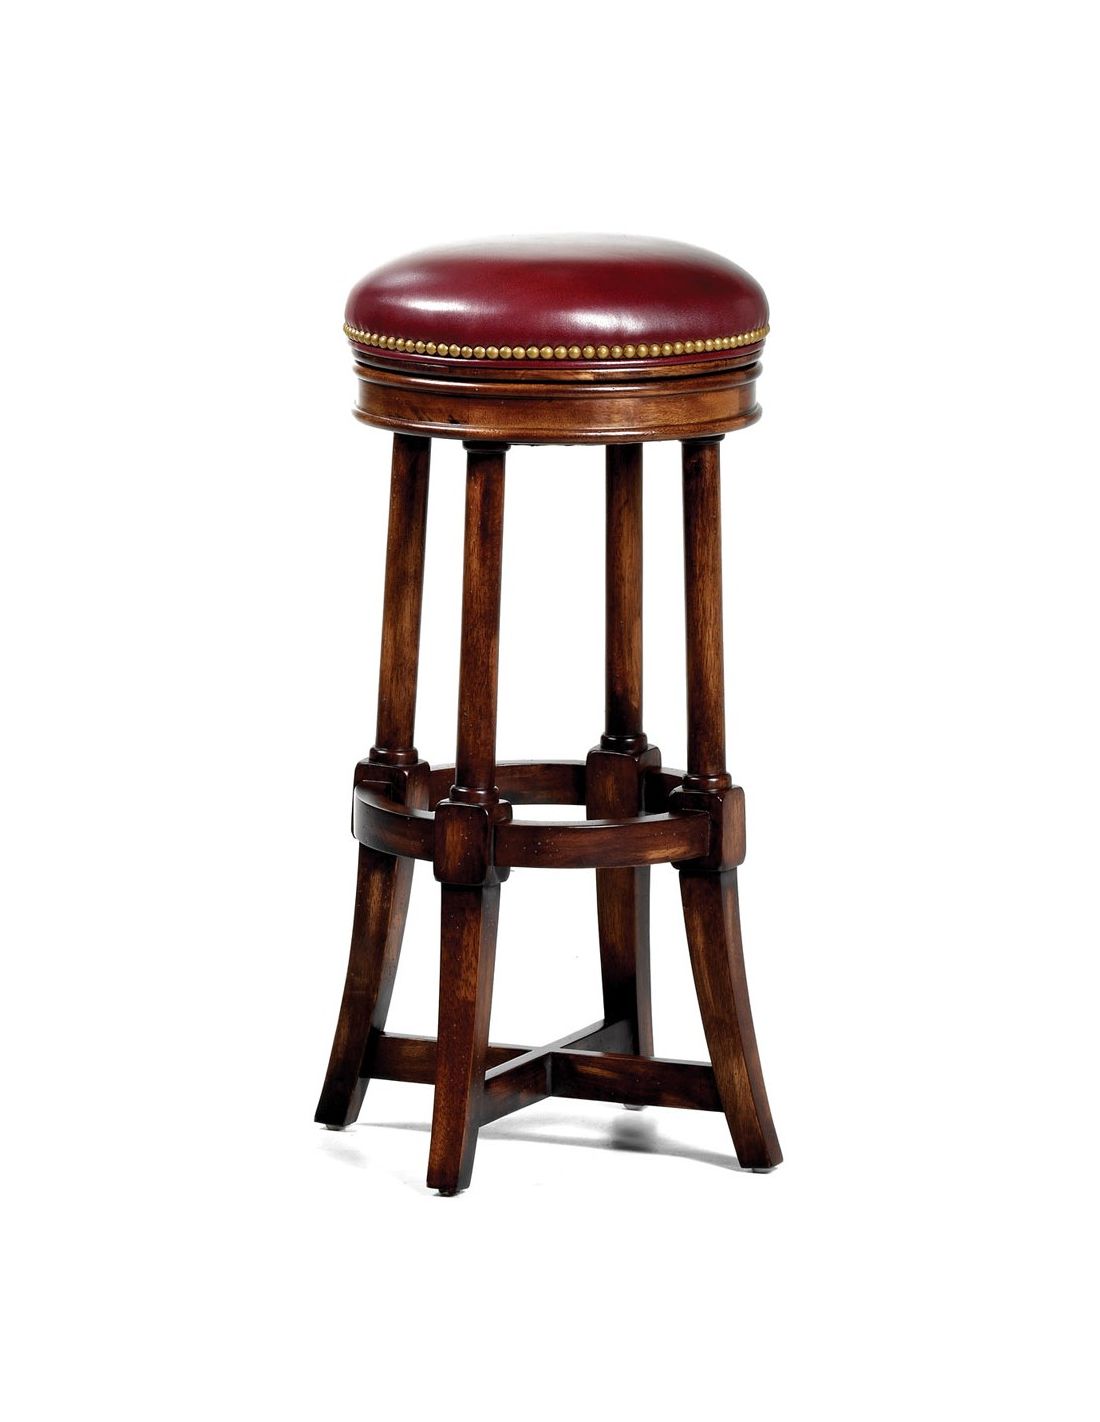 Unique Red Leather Round Bar Stool, Leather Top Bar Stools